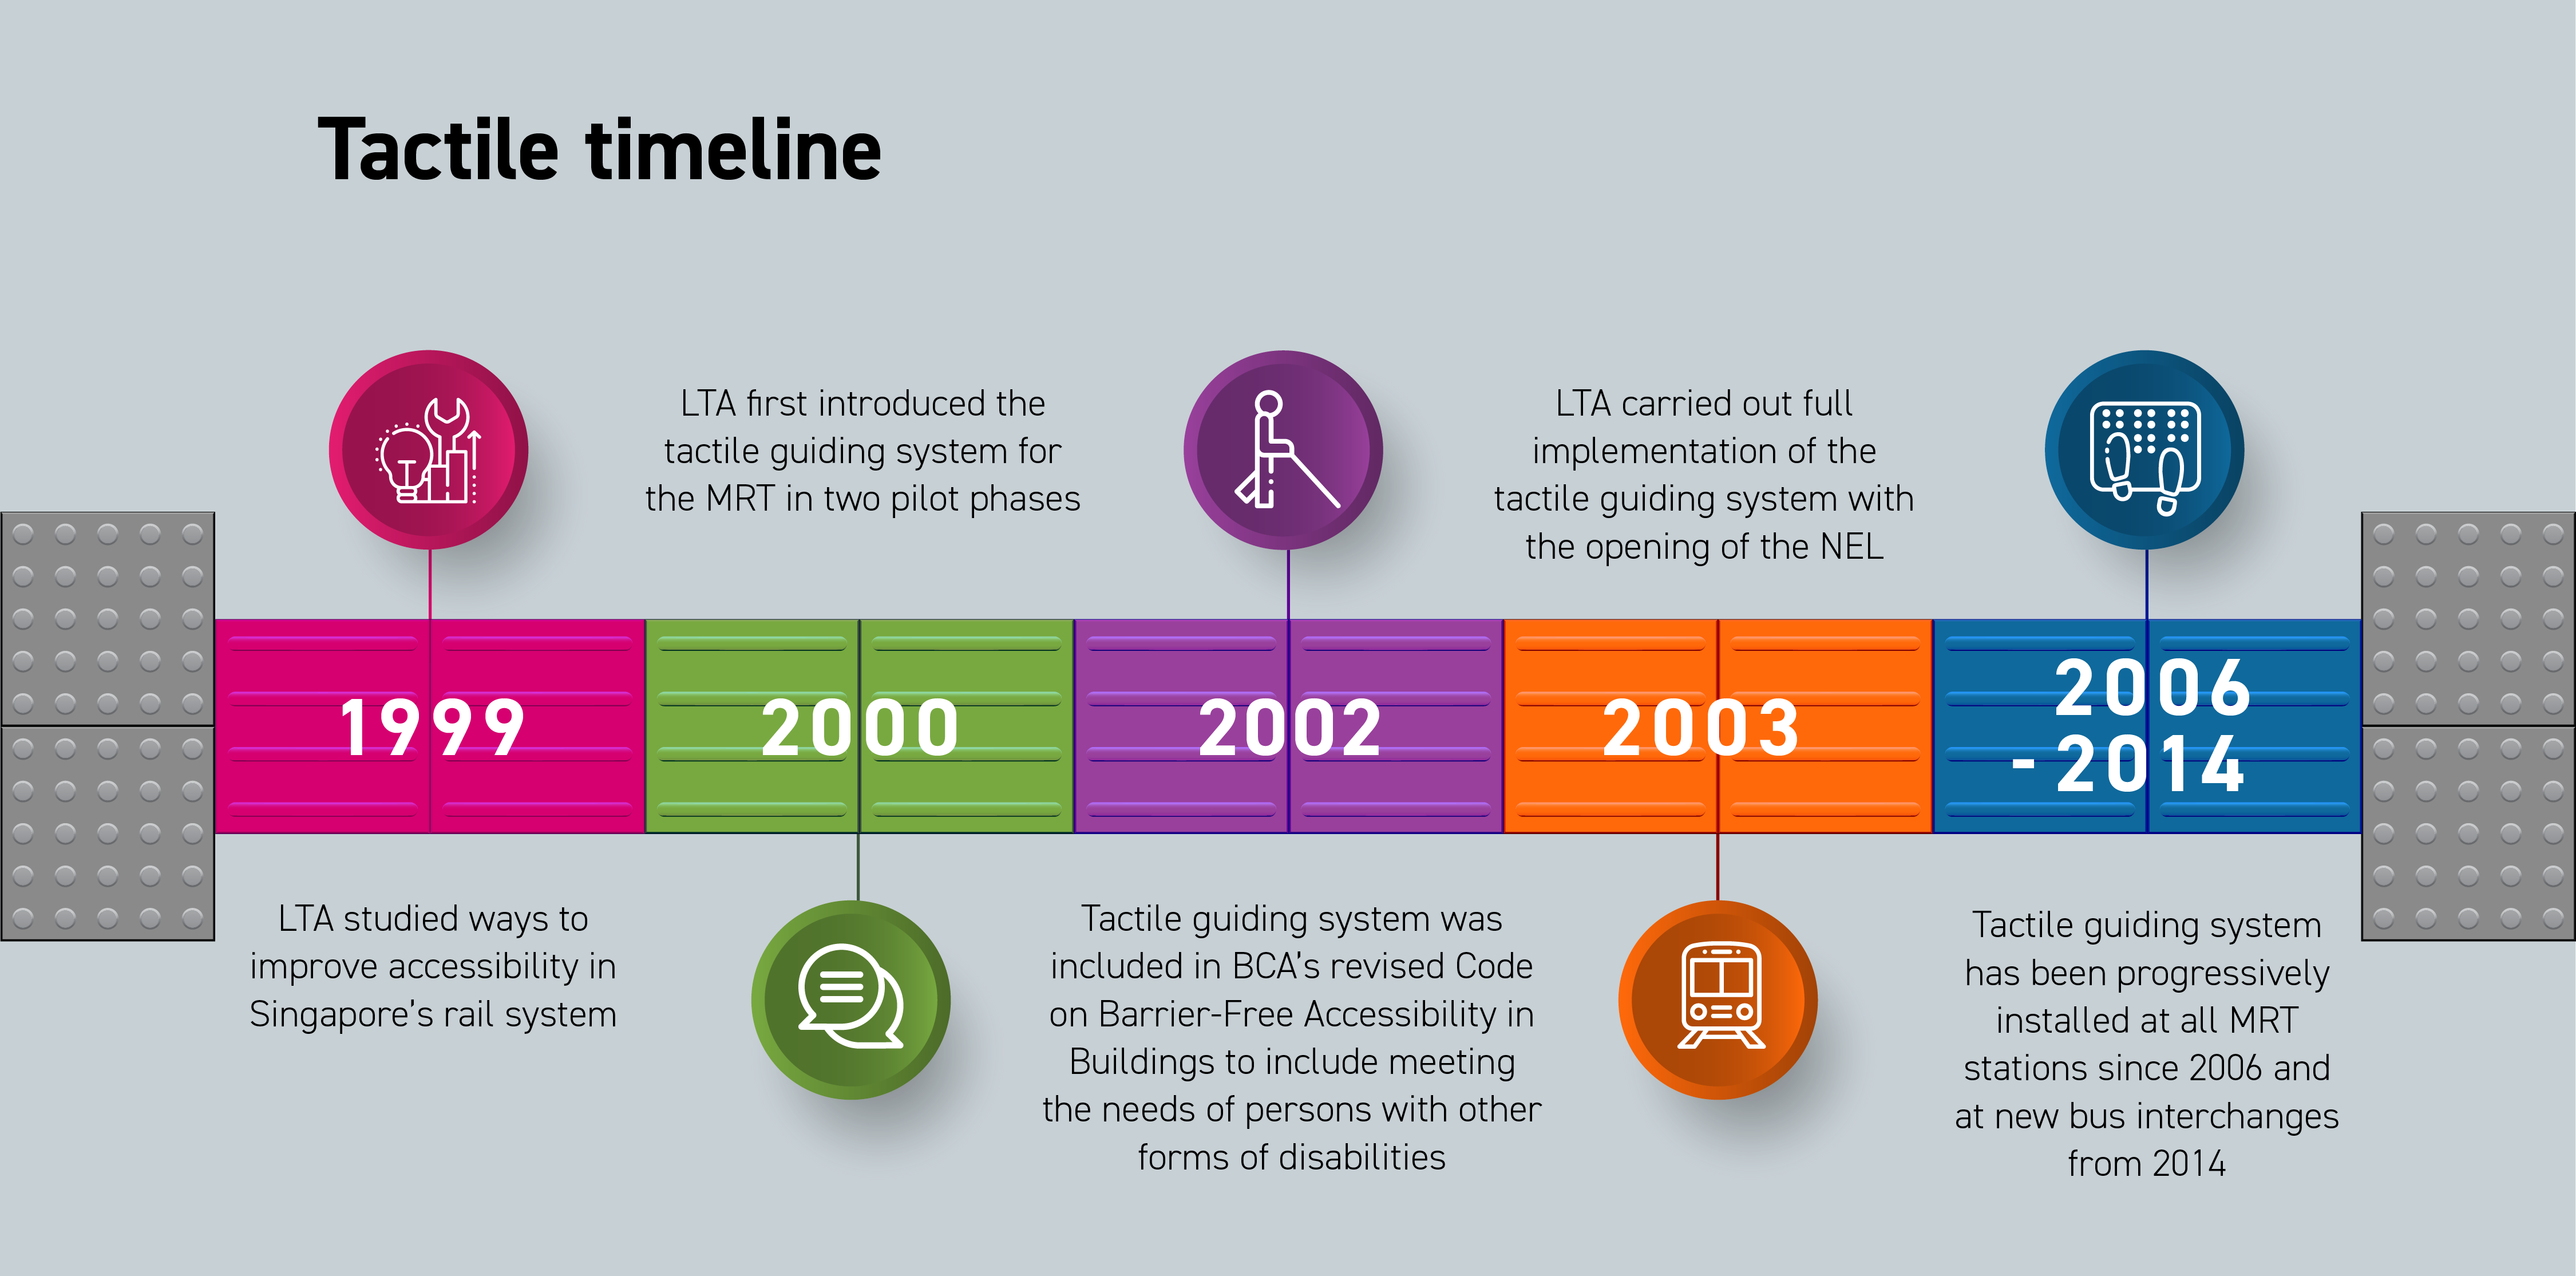 Timeline of History of Tactile Guiding System in Singapore